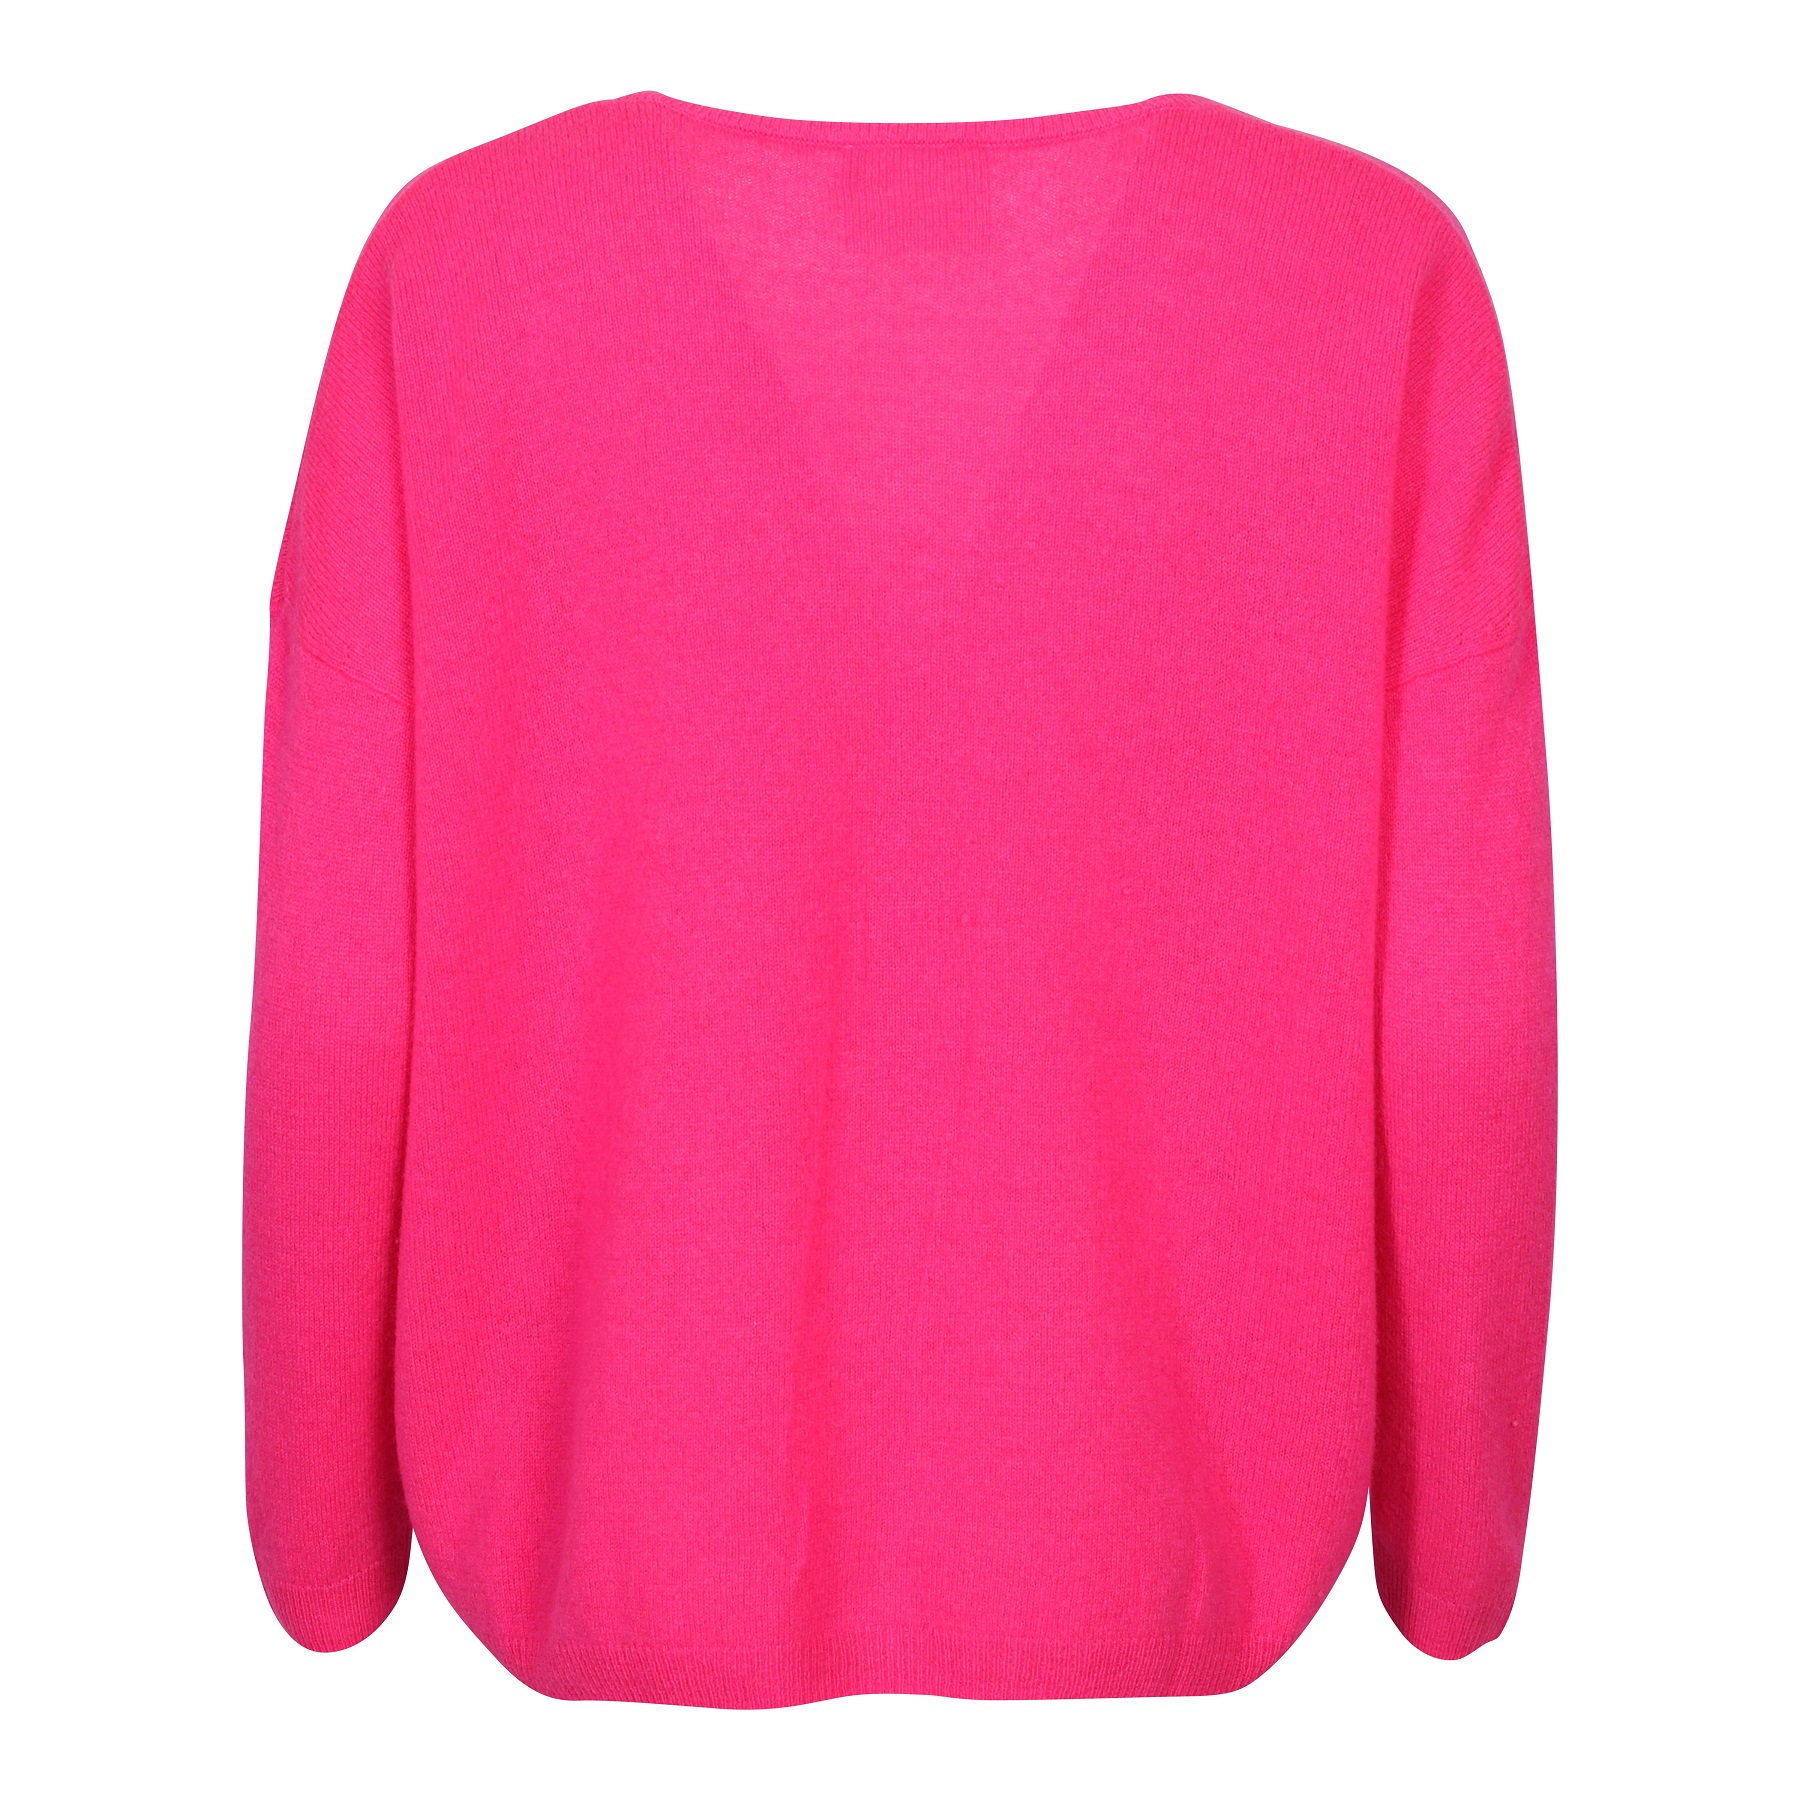 Absolut Cashmere Pullover Angele in Pink XS